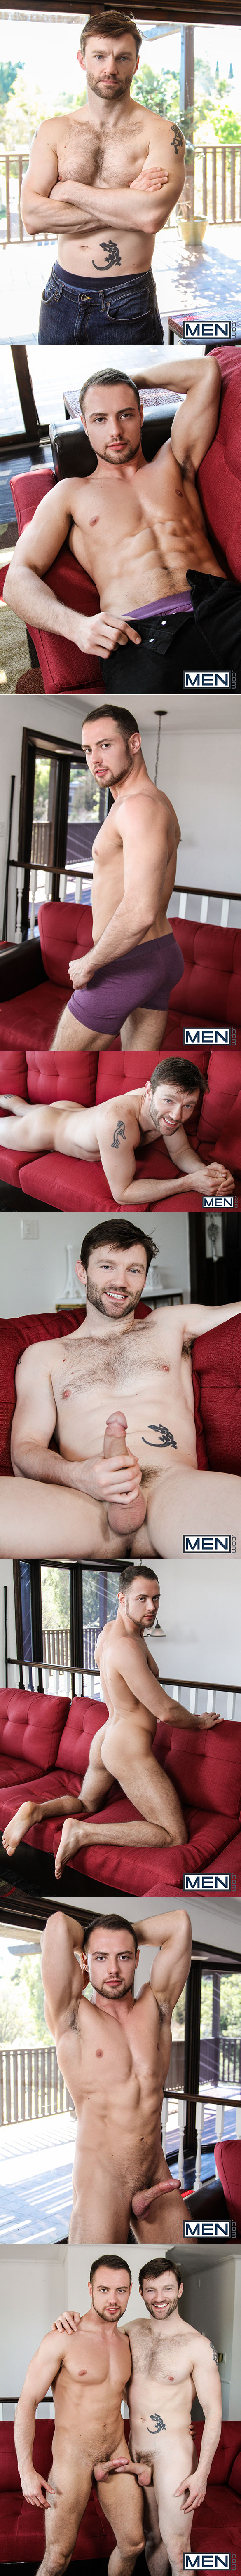 Men.com: Dennis West fucks Brendan Phillips in "My Wife Can't Find Out, Part 2"